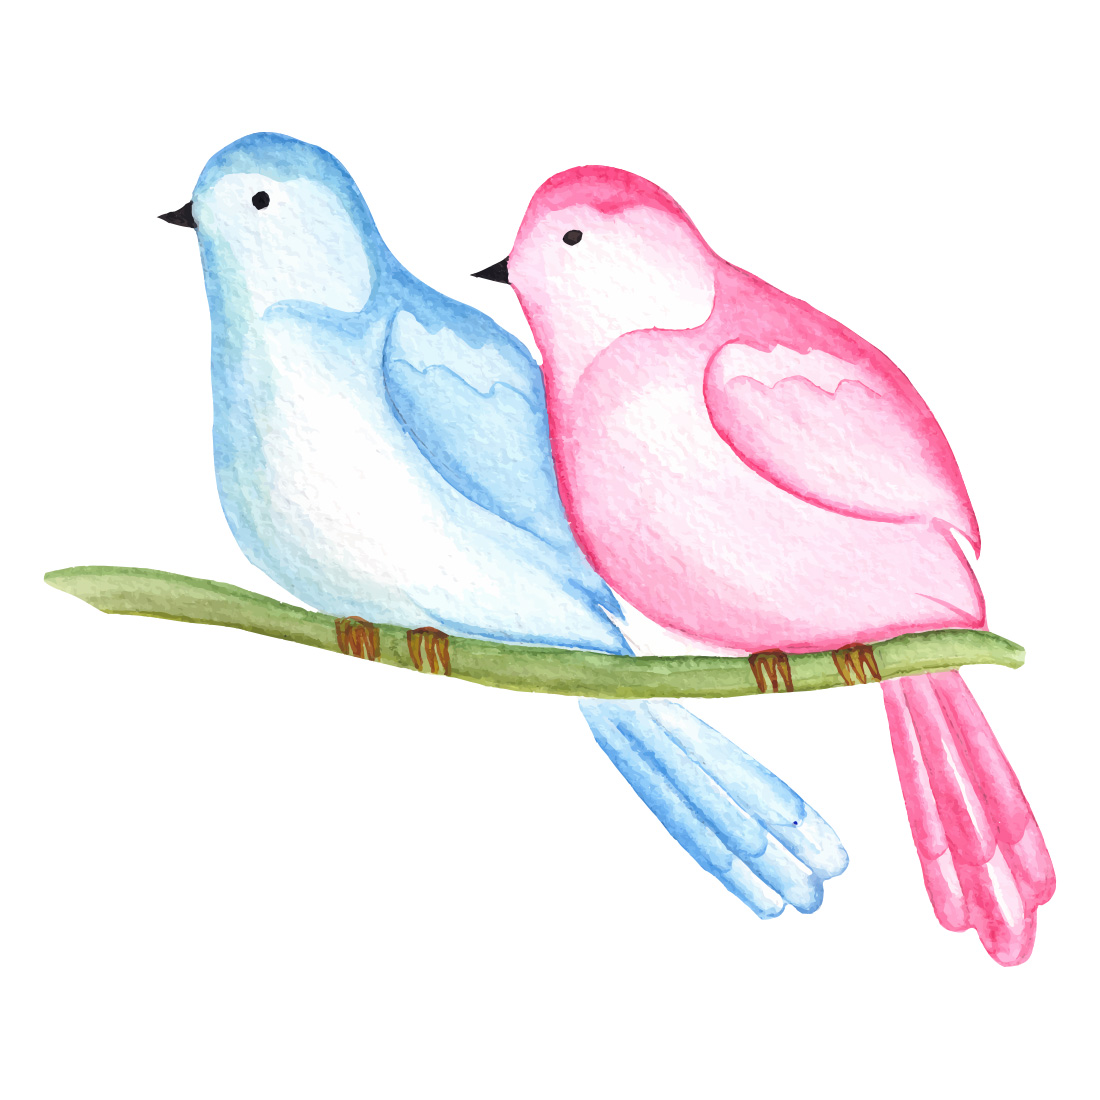 Two cute birds on a branch.